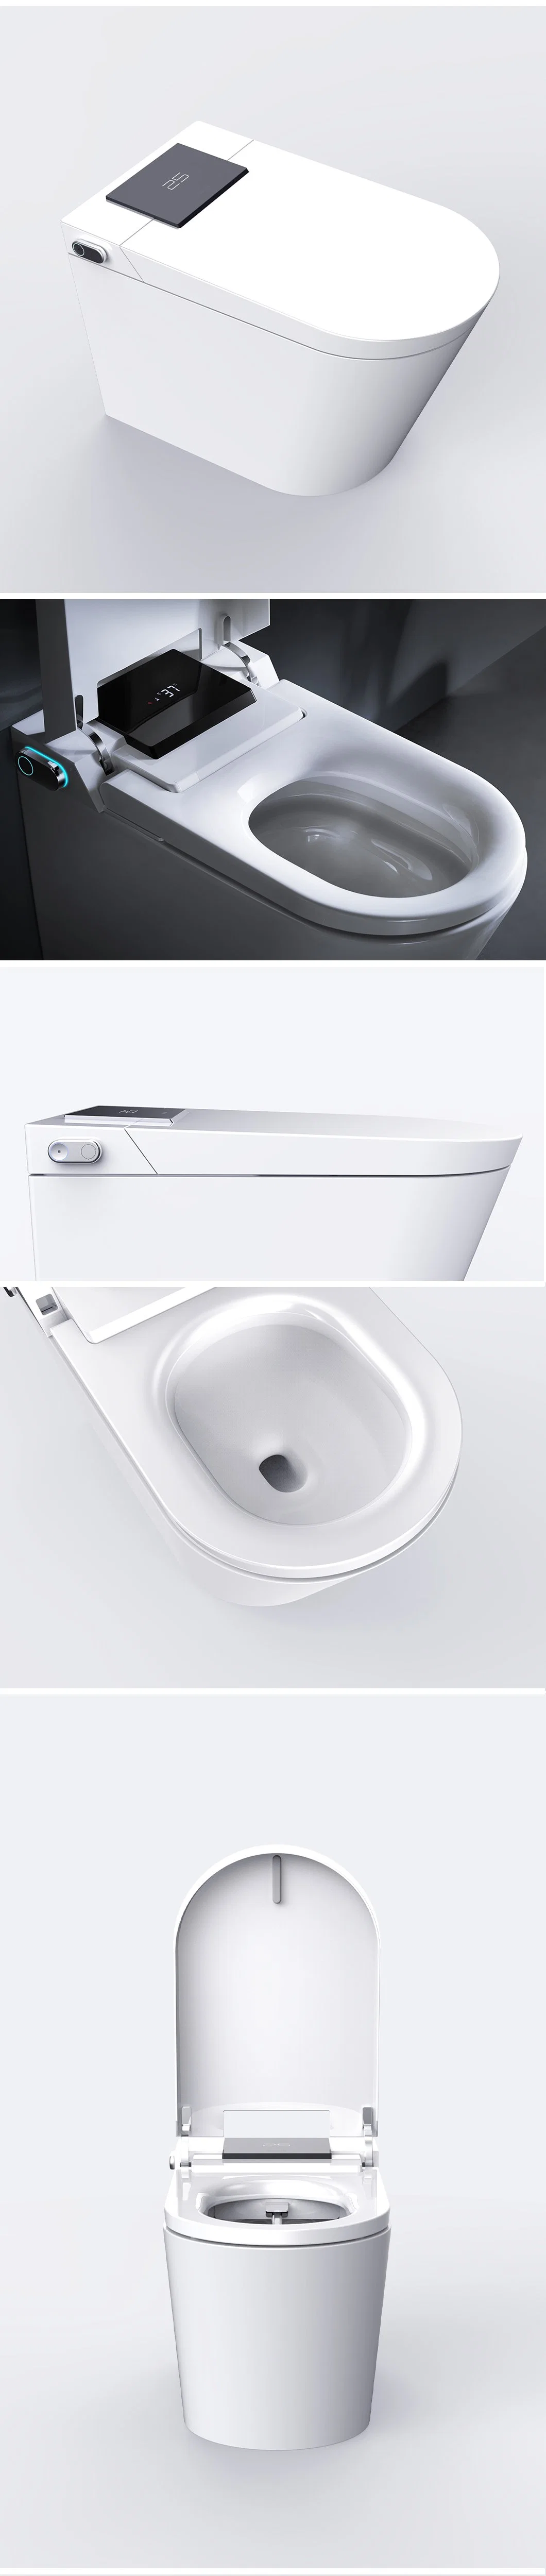 UL Approved Tankless All-in-One Machine Hydrocone Type Floor-Standing Smart Toilet Bidet